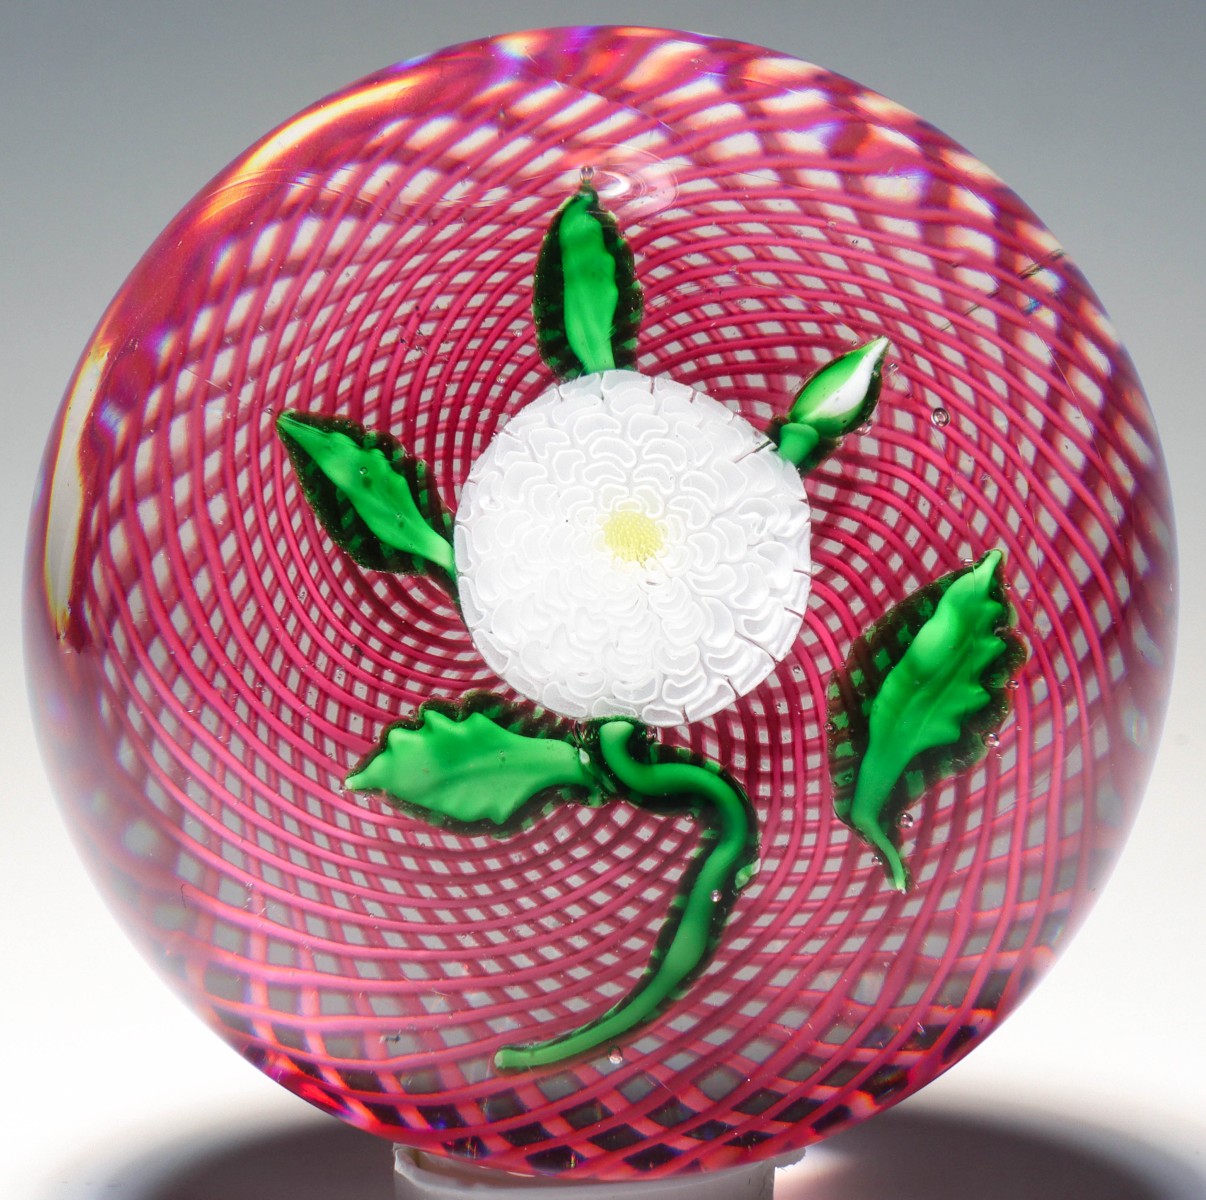 A VERY FINE ANTIQUE ST. LOUIS POMPON PAPERWEIGHT